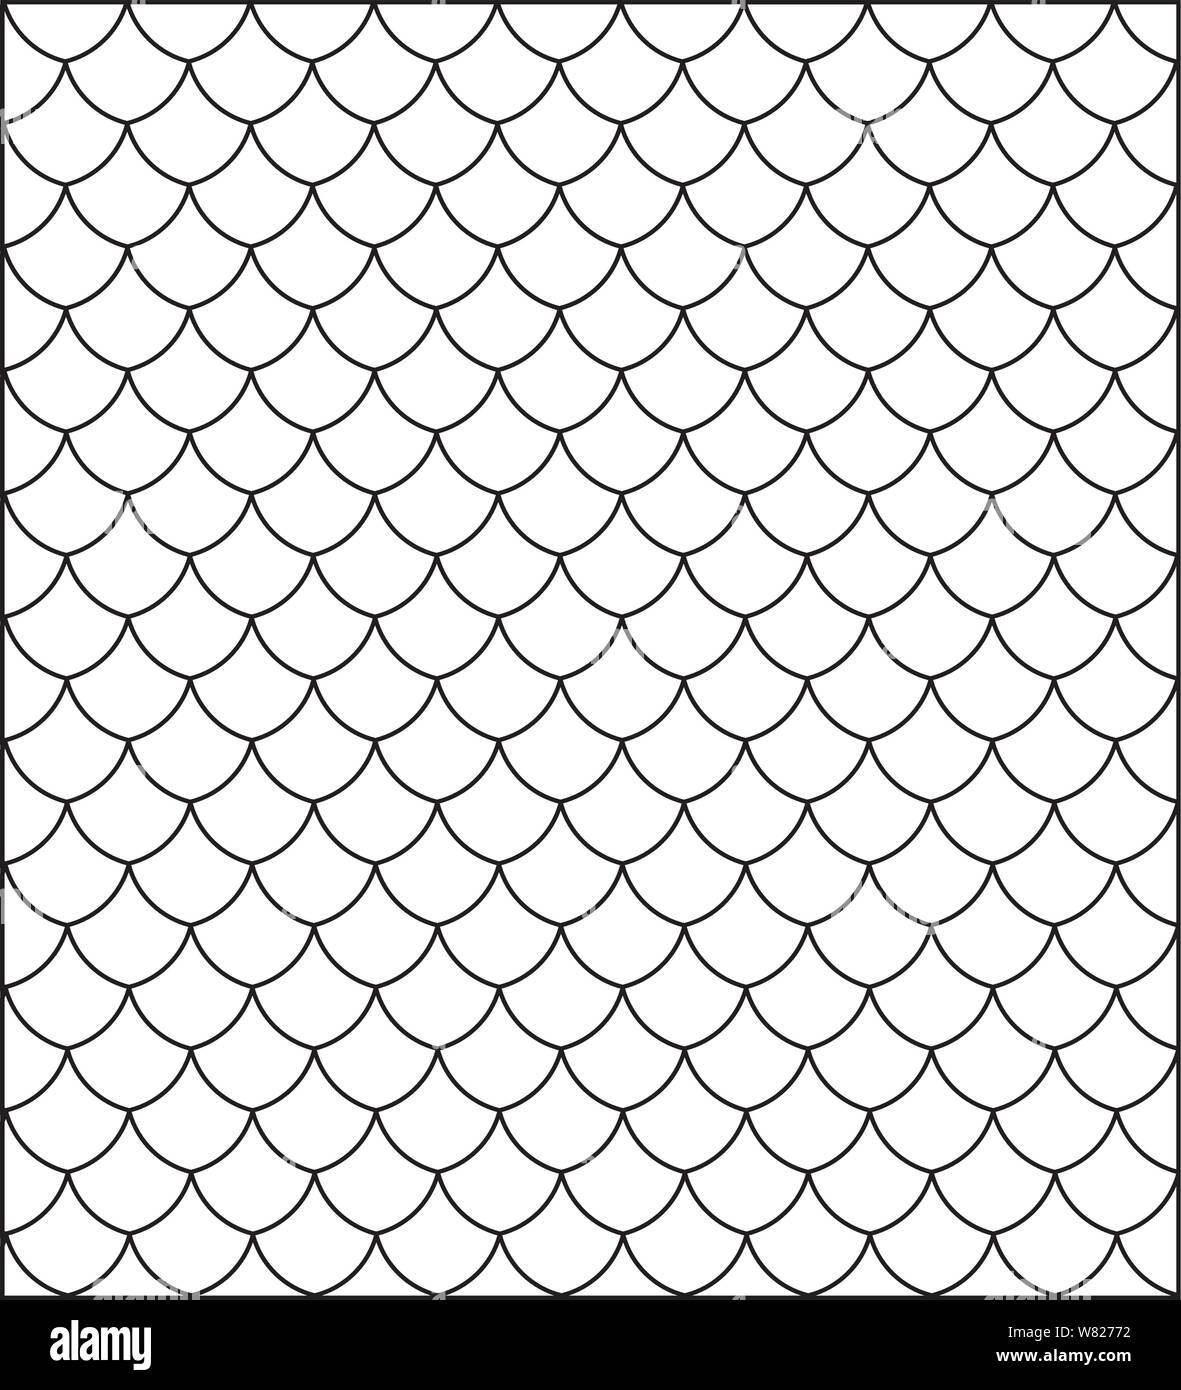 Seamless pattern abstract fish scales Black and White Stock Photos & Images  - Alamy